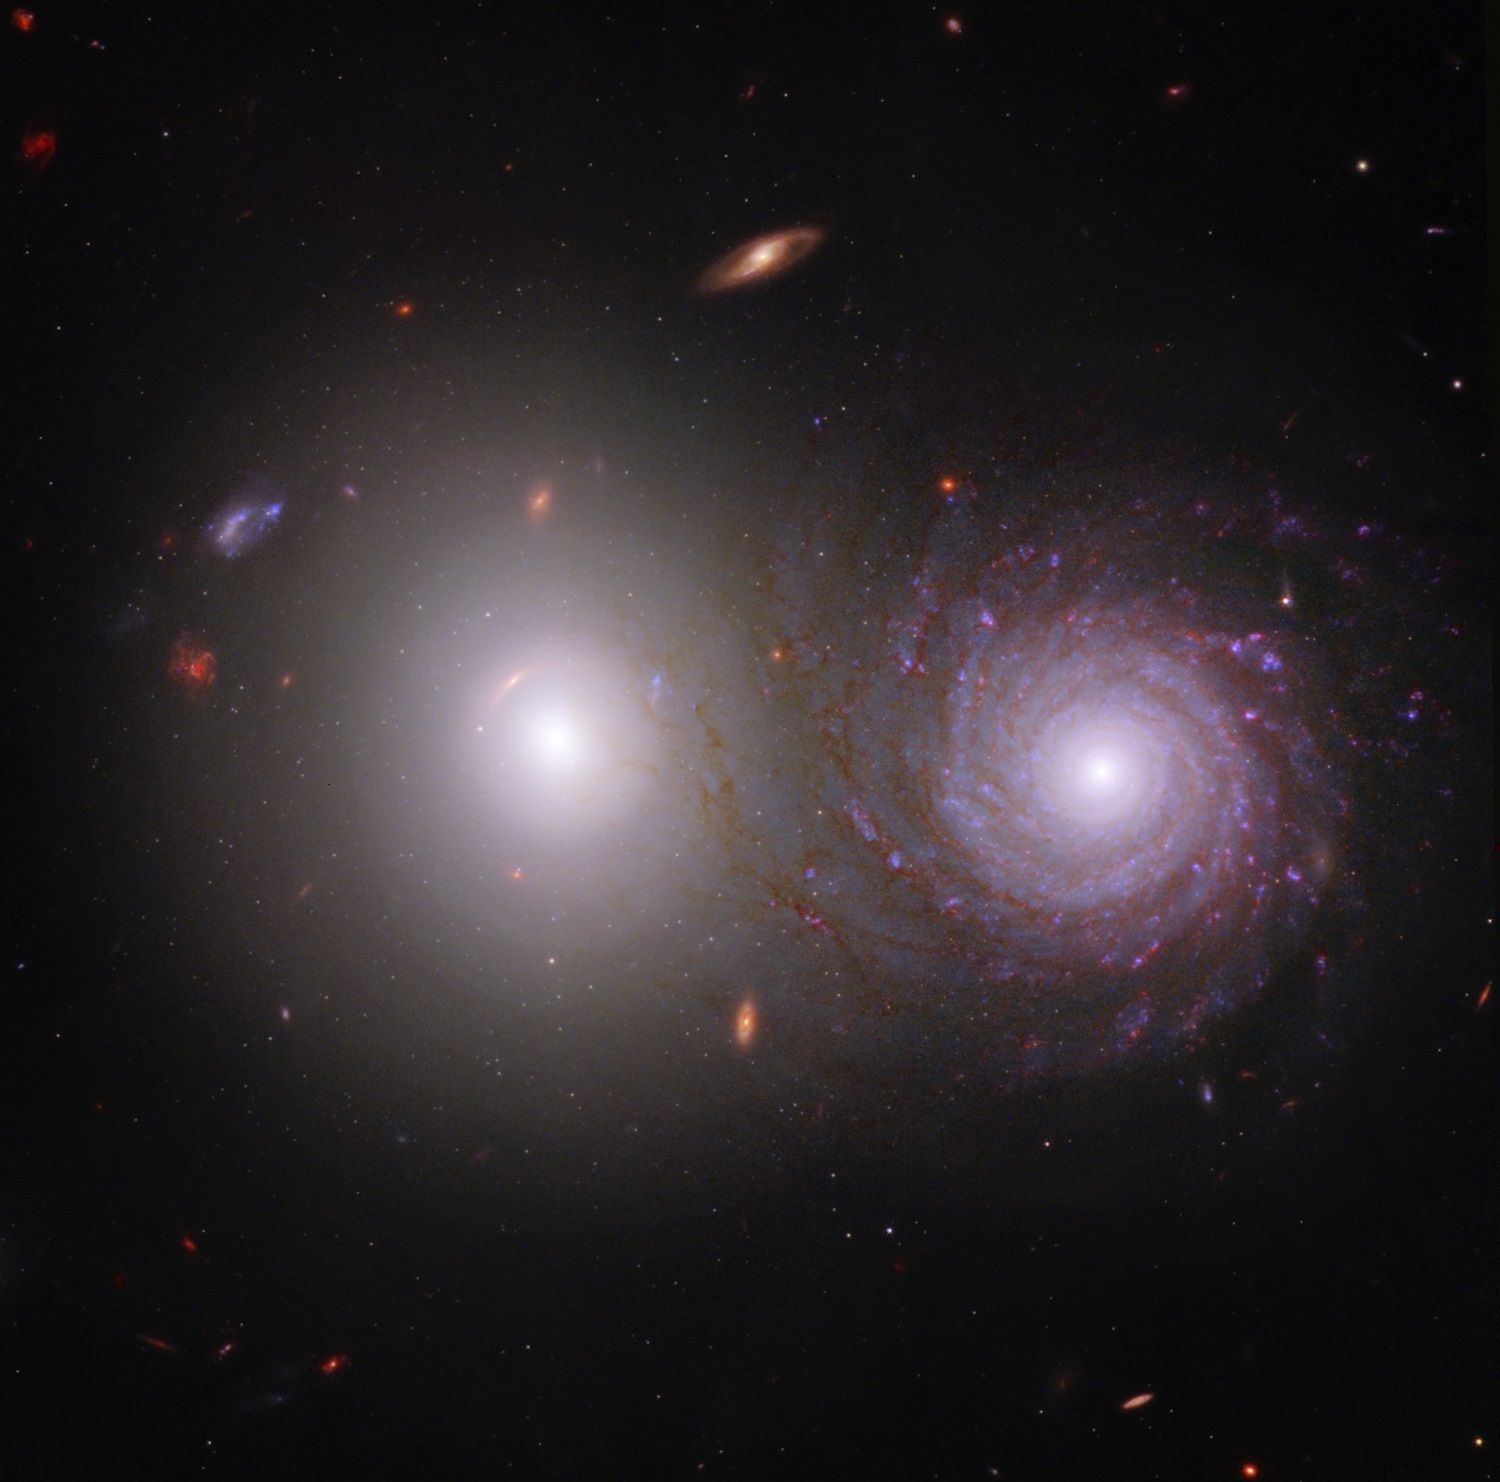 Physicists Unravel Mystery of Missing Spiral Galaxies in the Supergalactic Plane